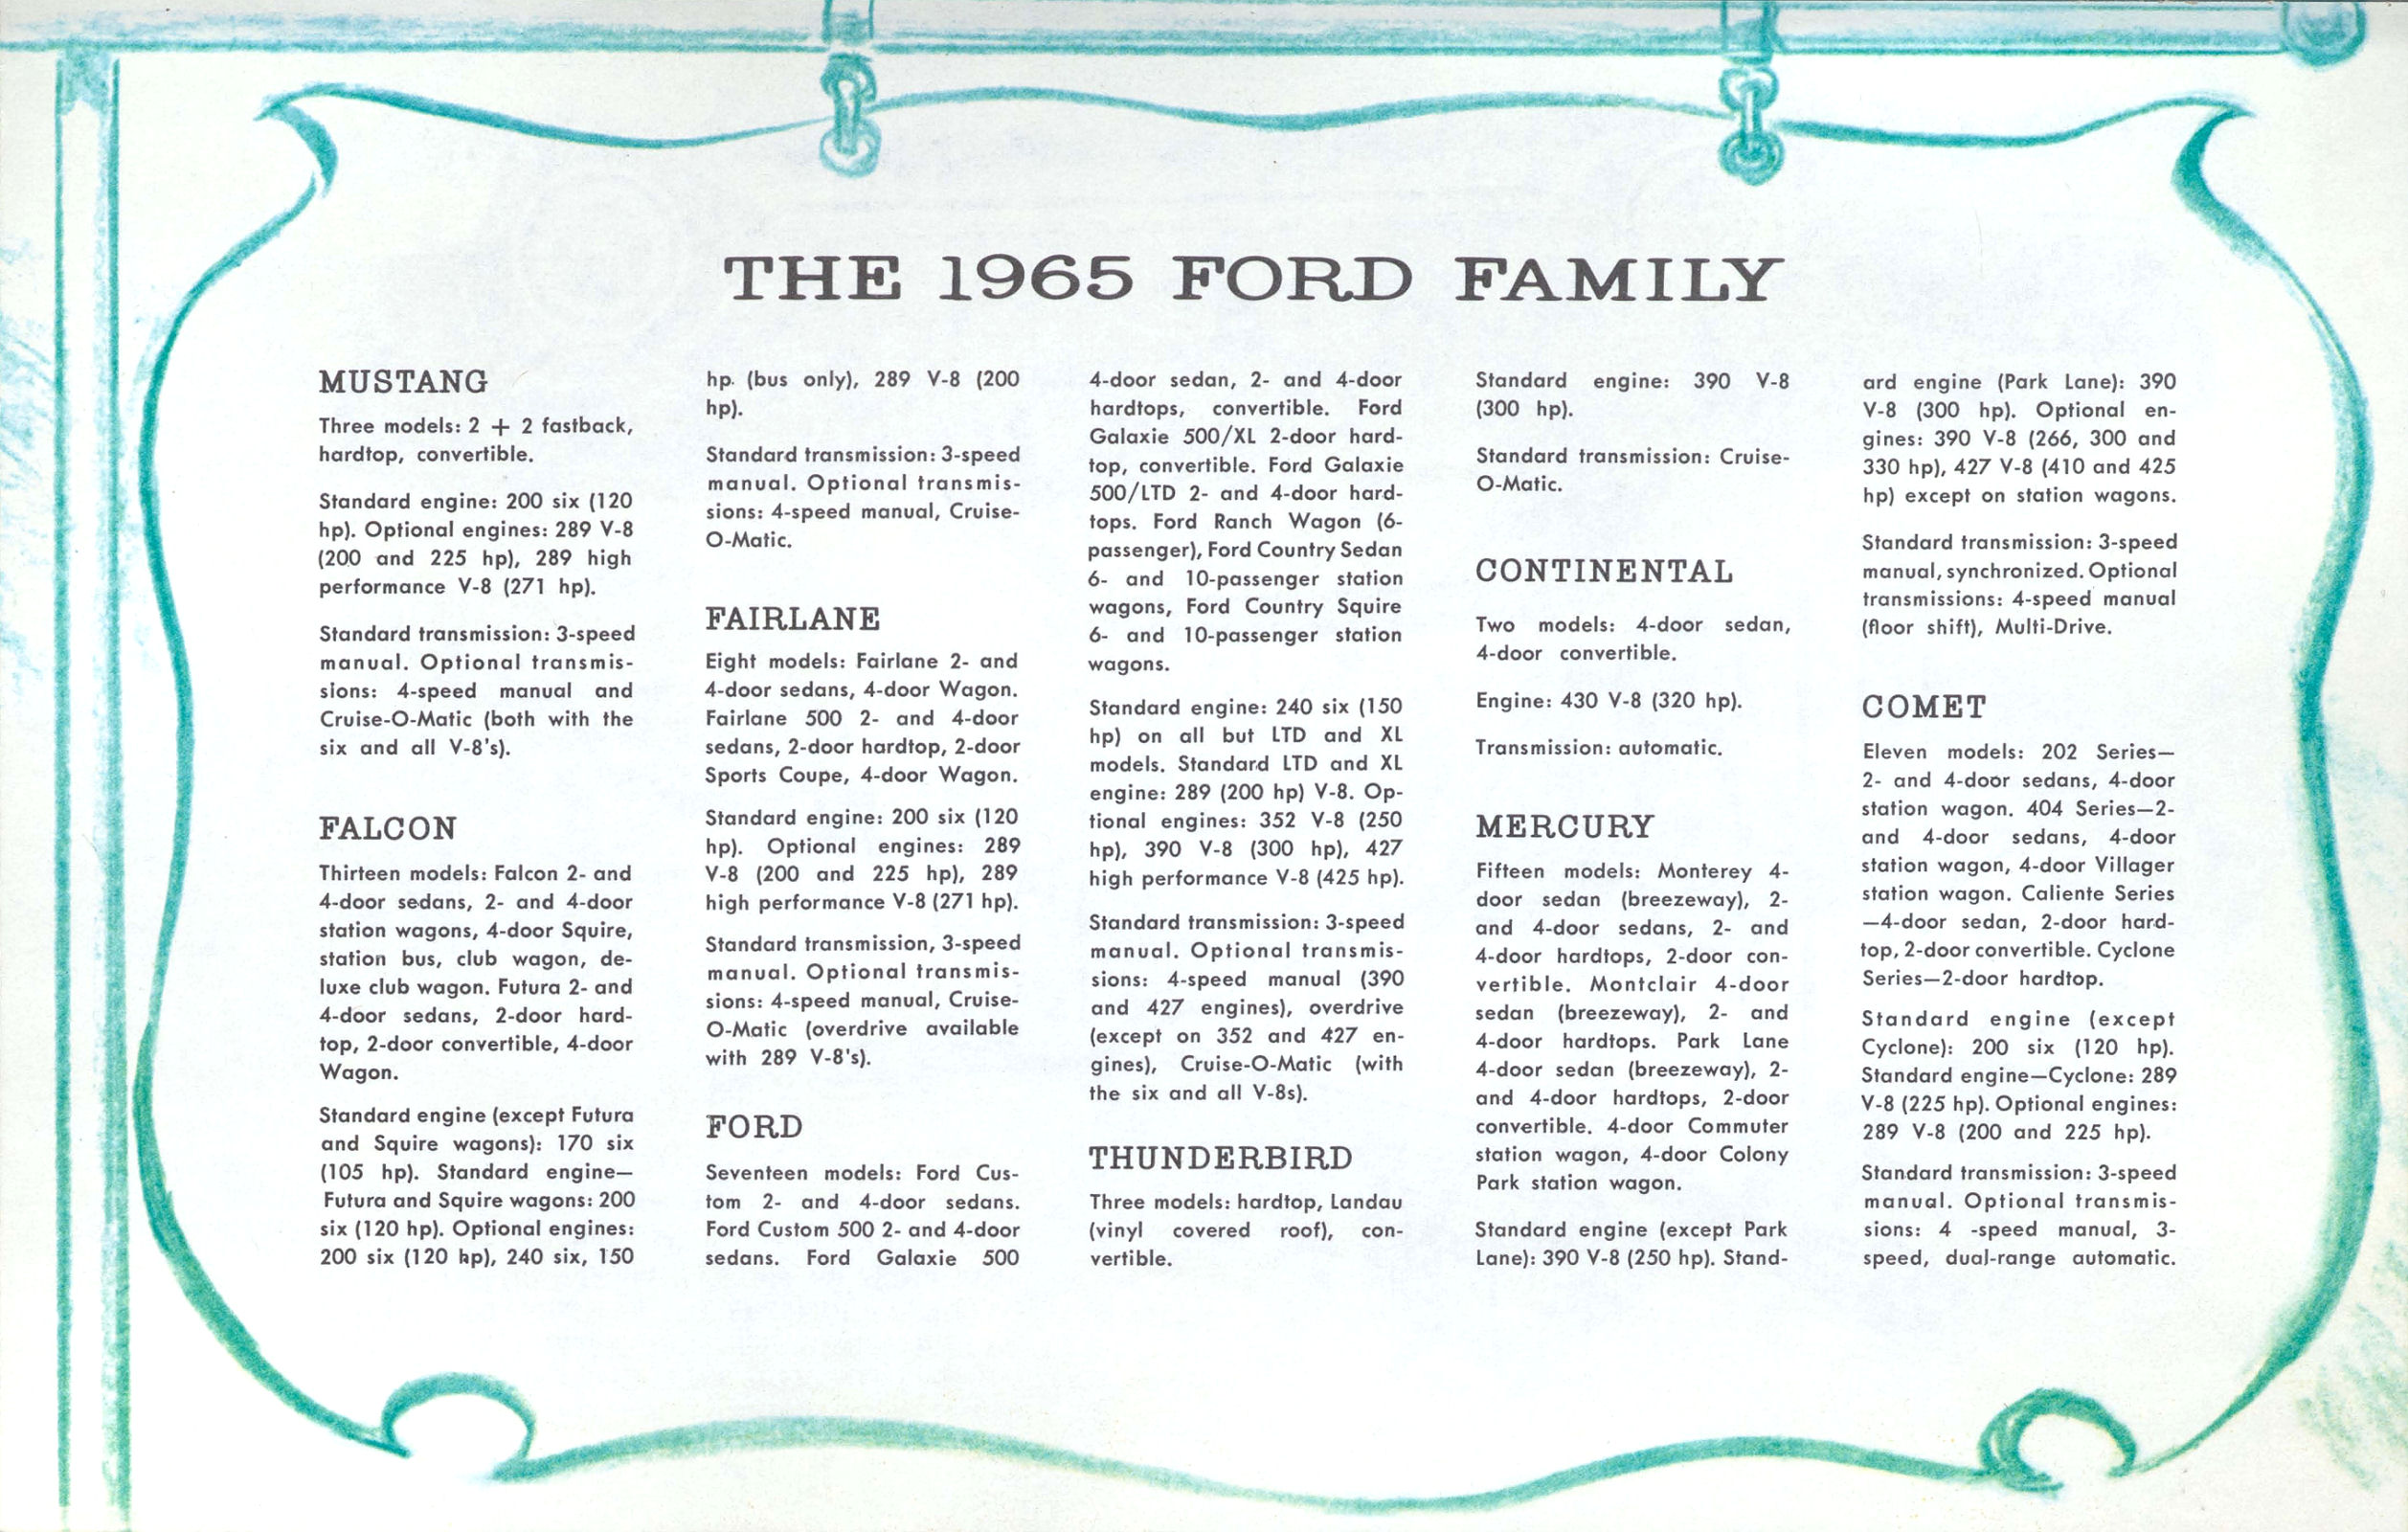 1965 Ford Family of Cars-15